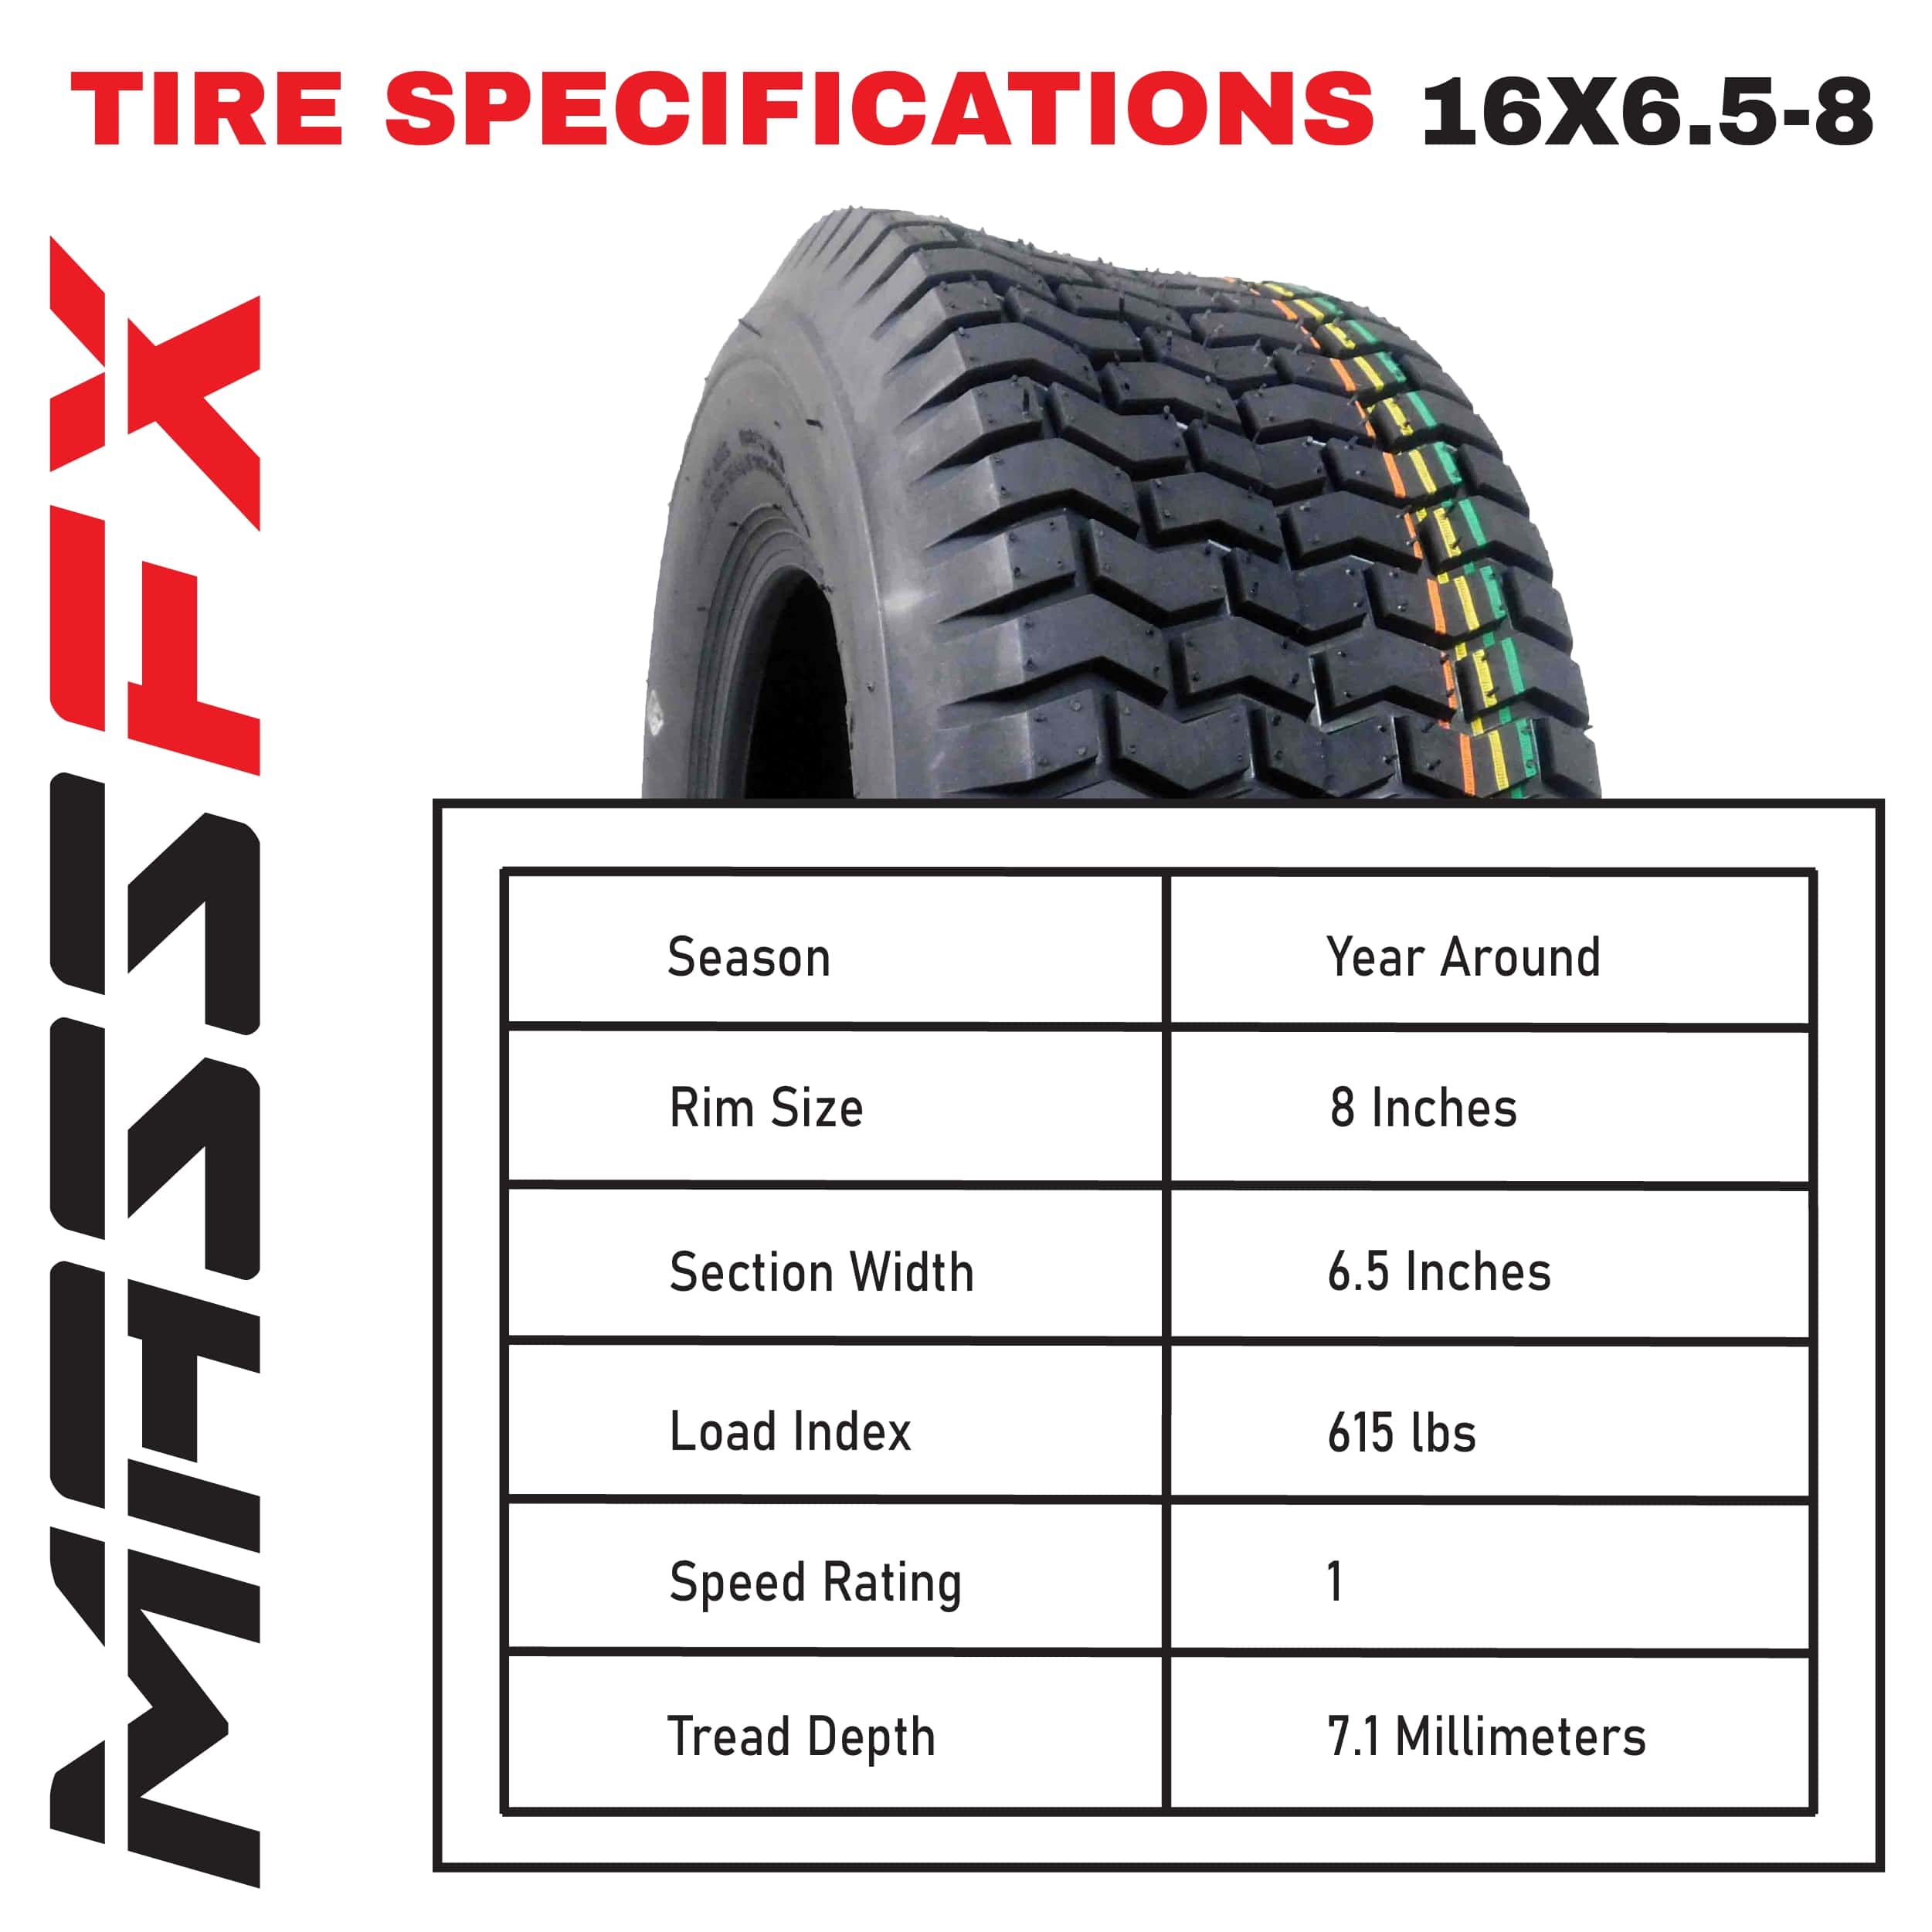 MASSFX 16x6.5-8 Lawn & Garden, Lawn Mower & Tractor Tires 4 Ply with 7mm Tread Depth (2 Pack) - image 5 of 9